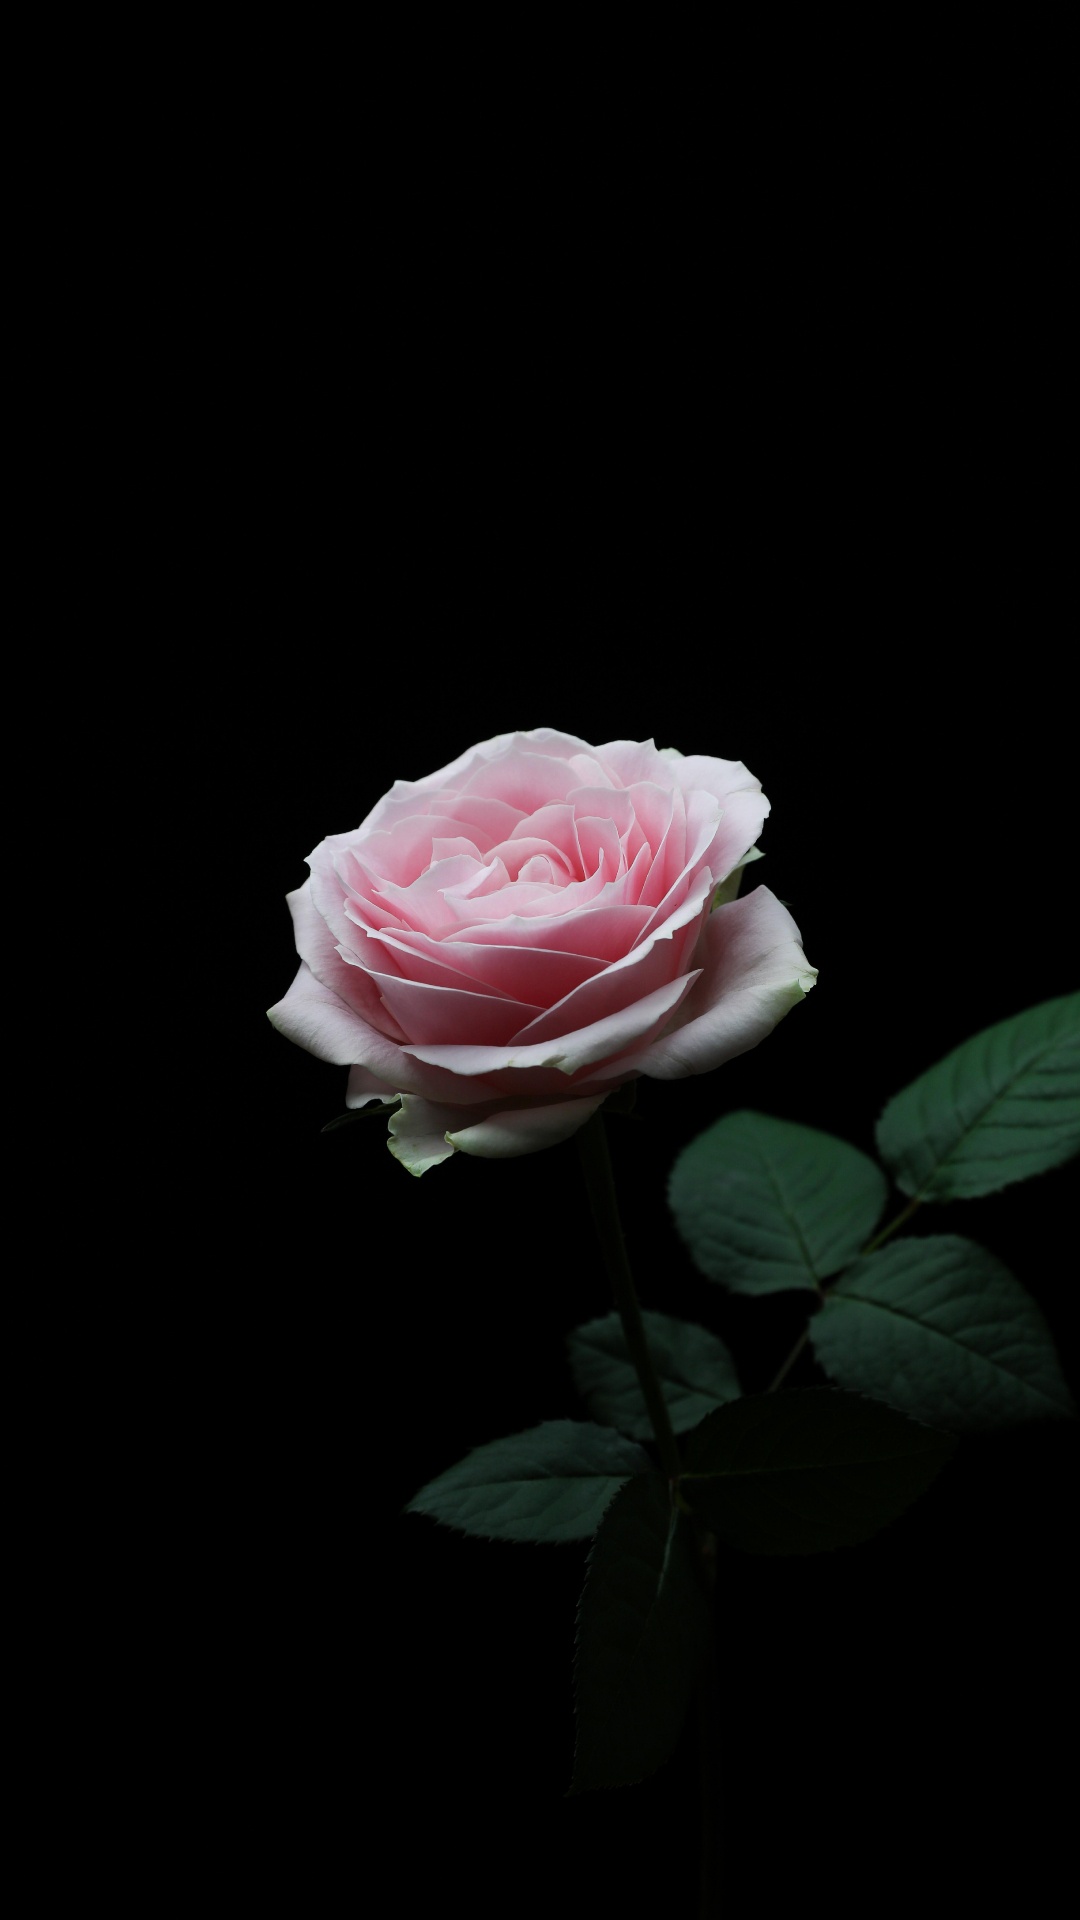 Pink Rose in Bloom With Black Background. Wallpaper in 1080x1920 Resolution